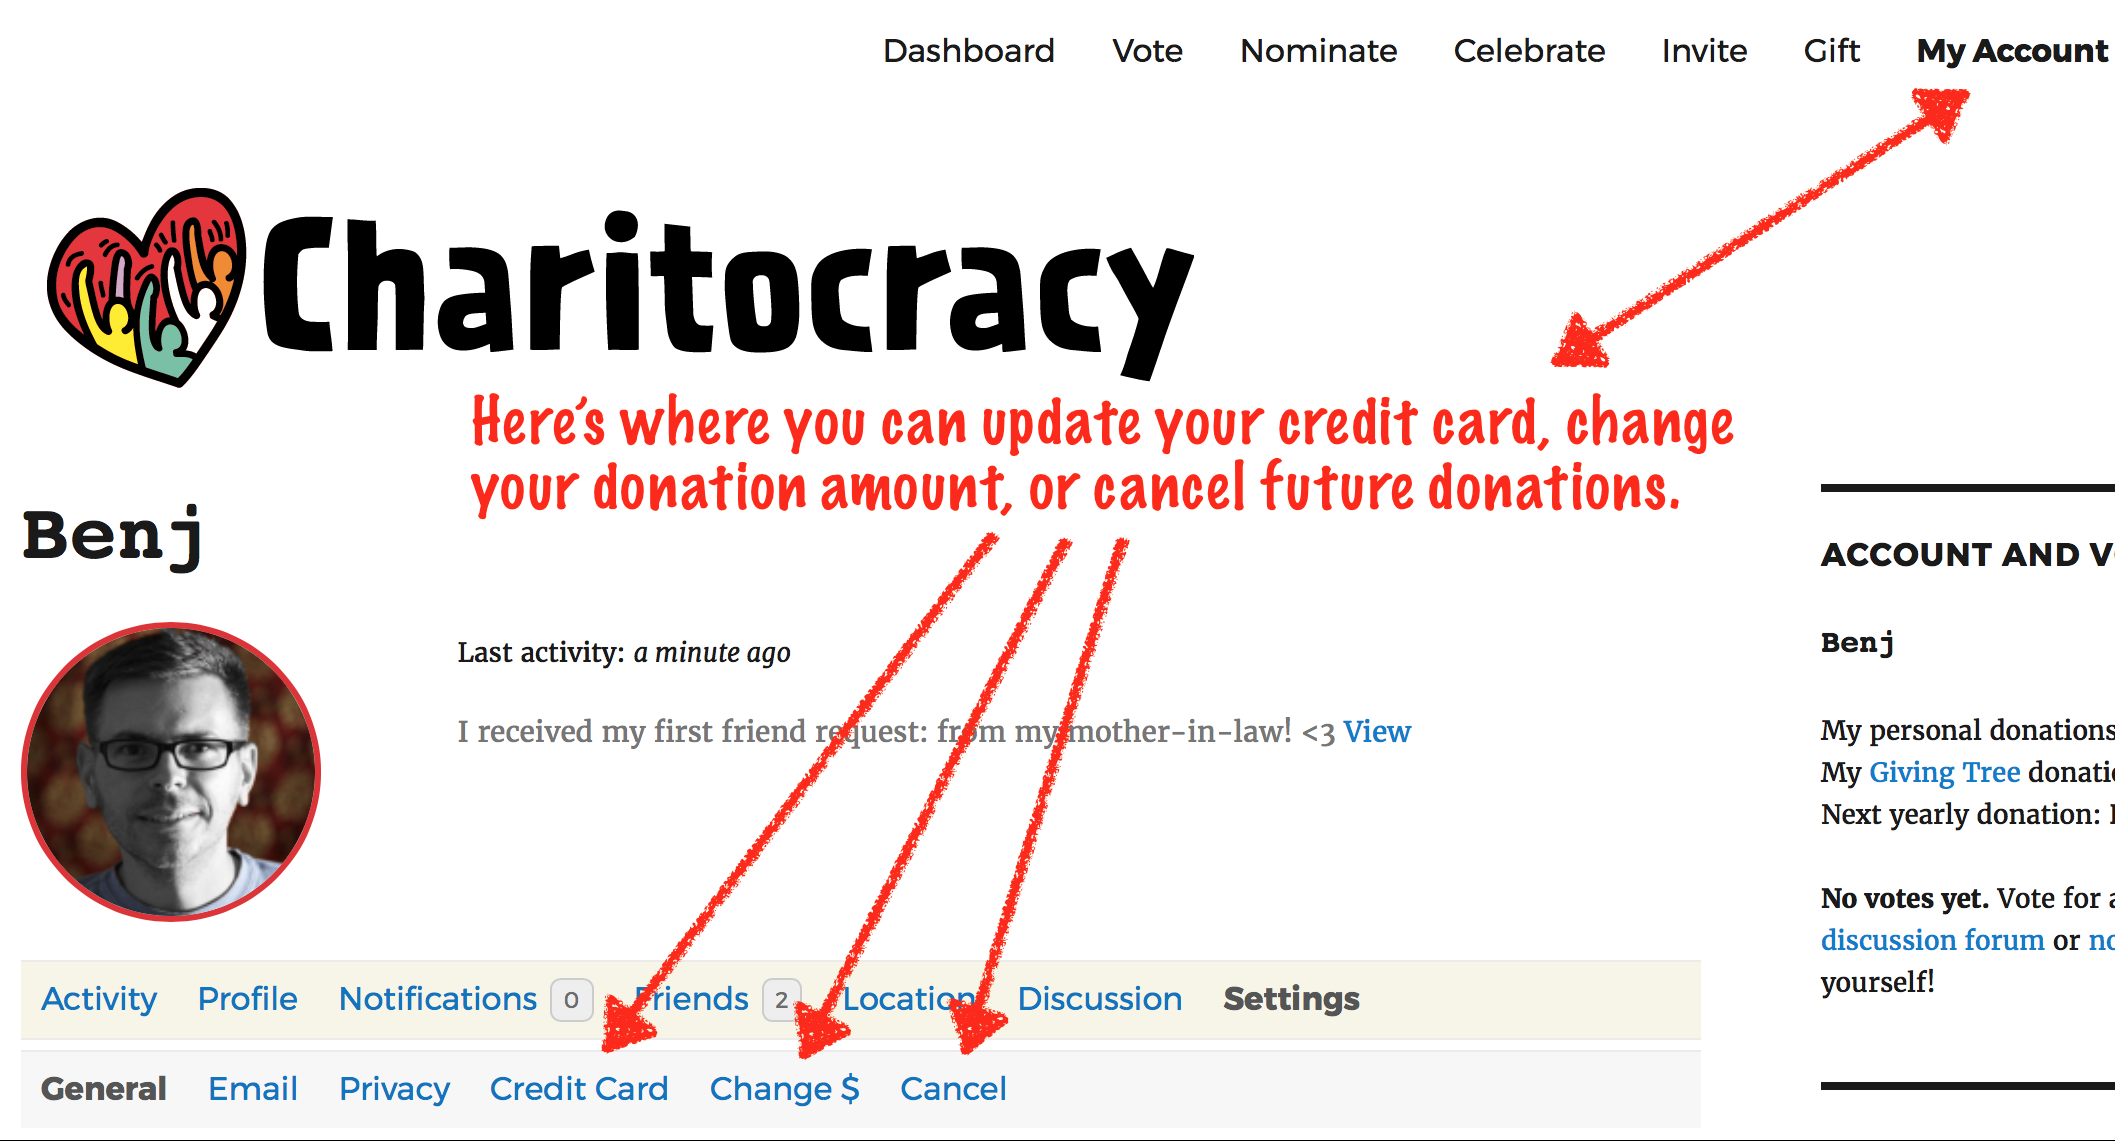 Here's where you can update your credit card, change your annual donation amount, or cancel future donations